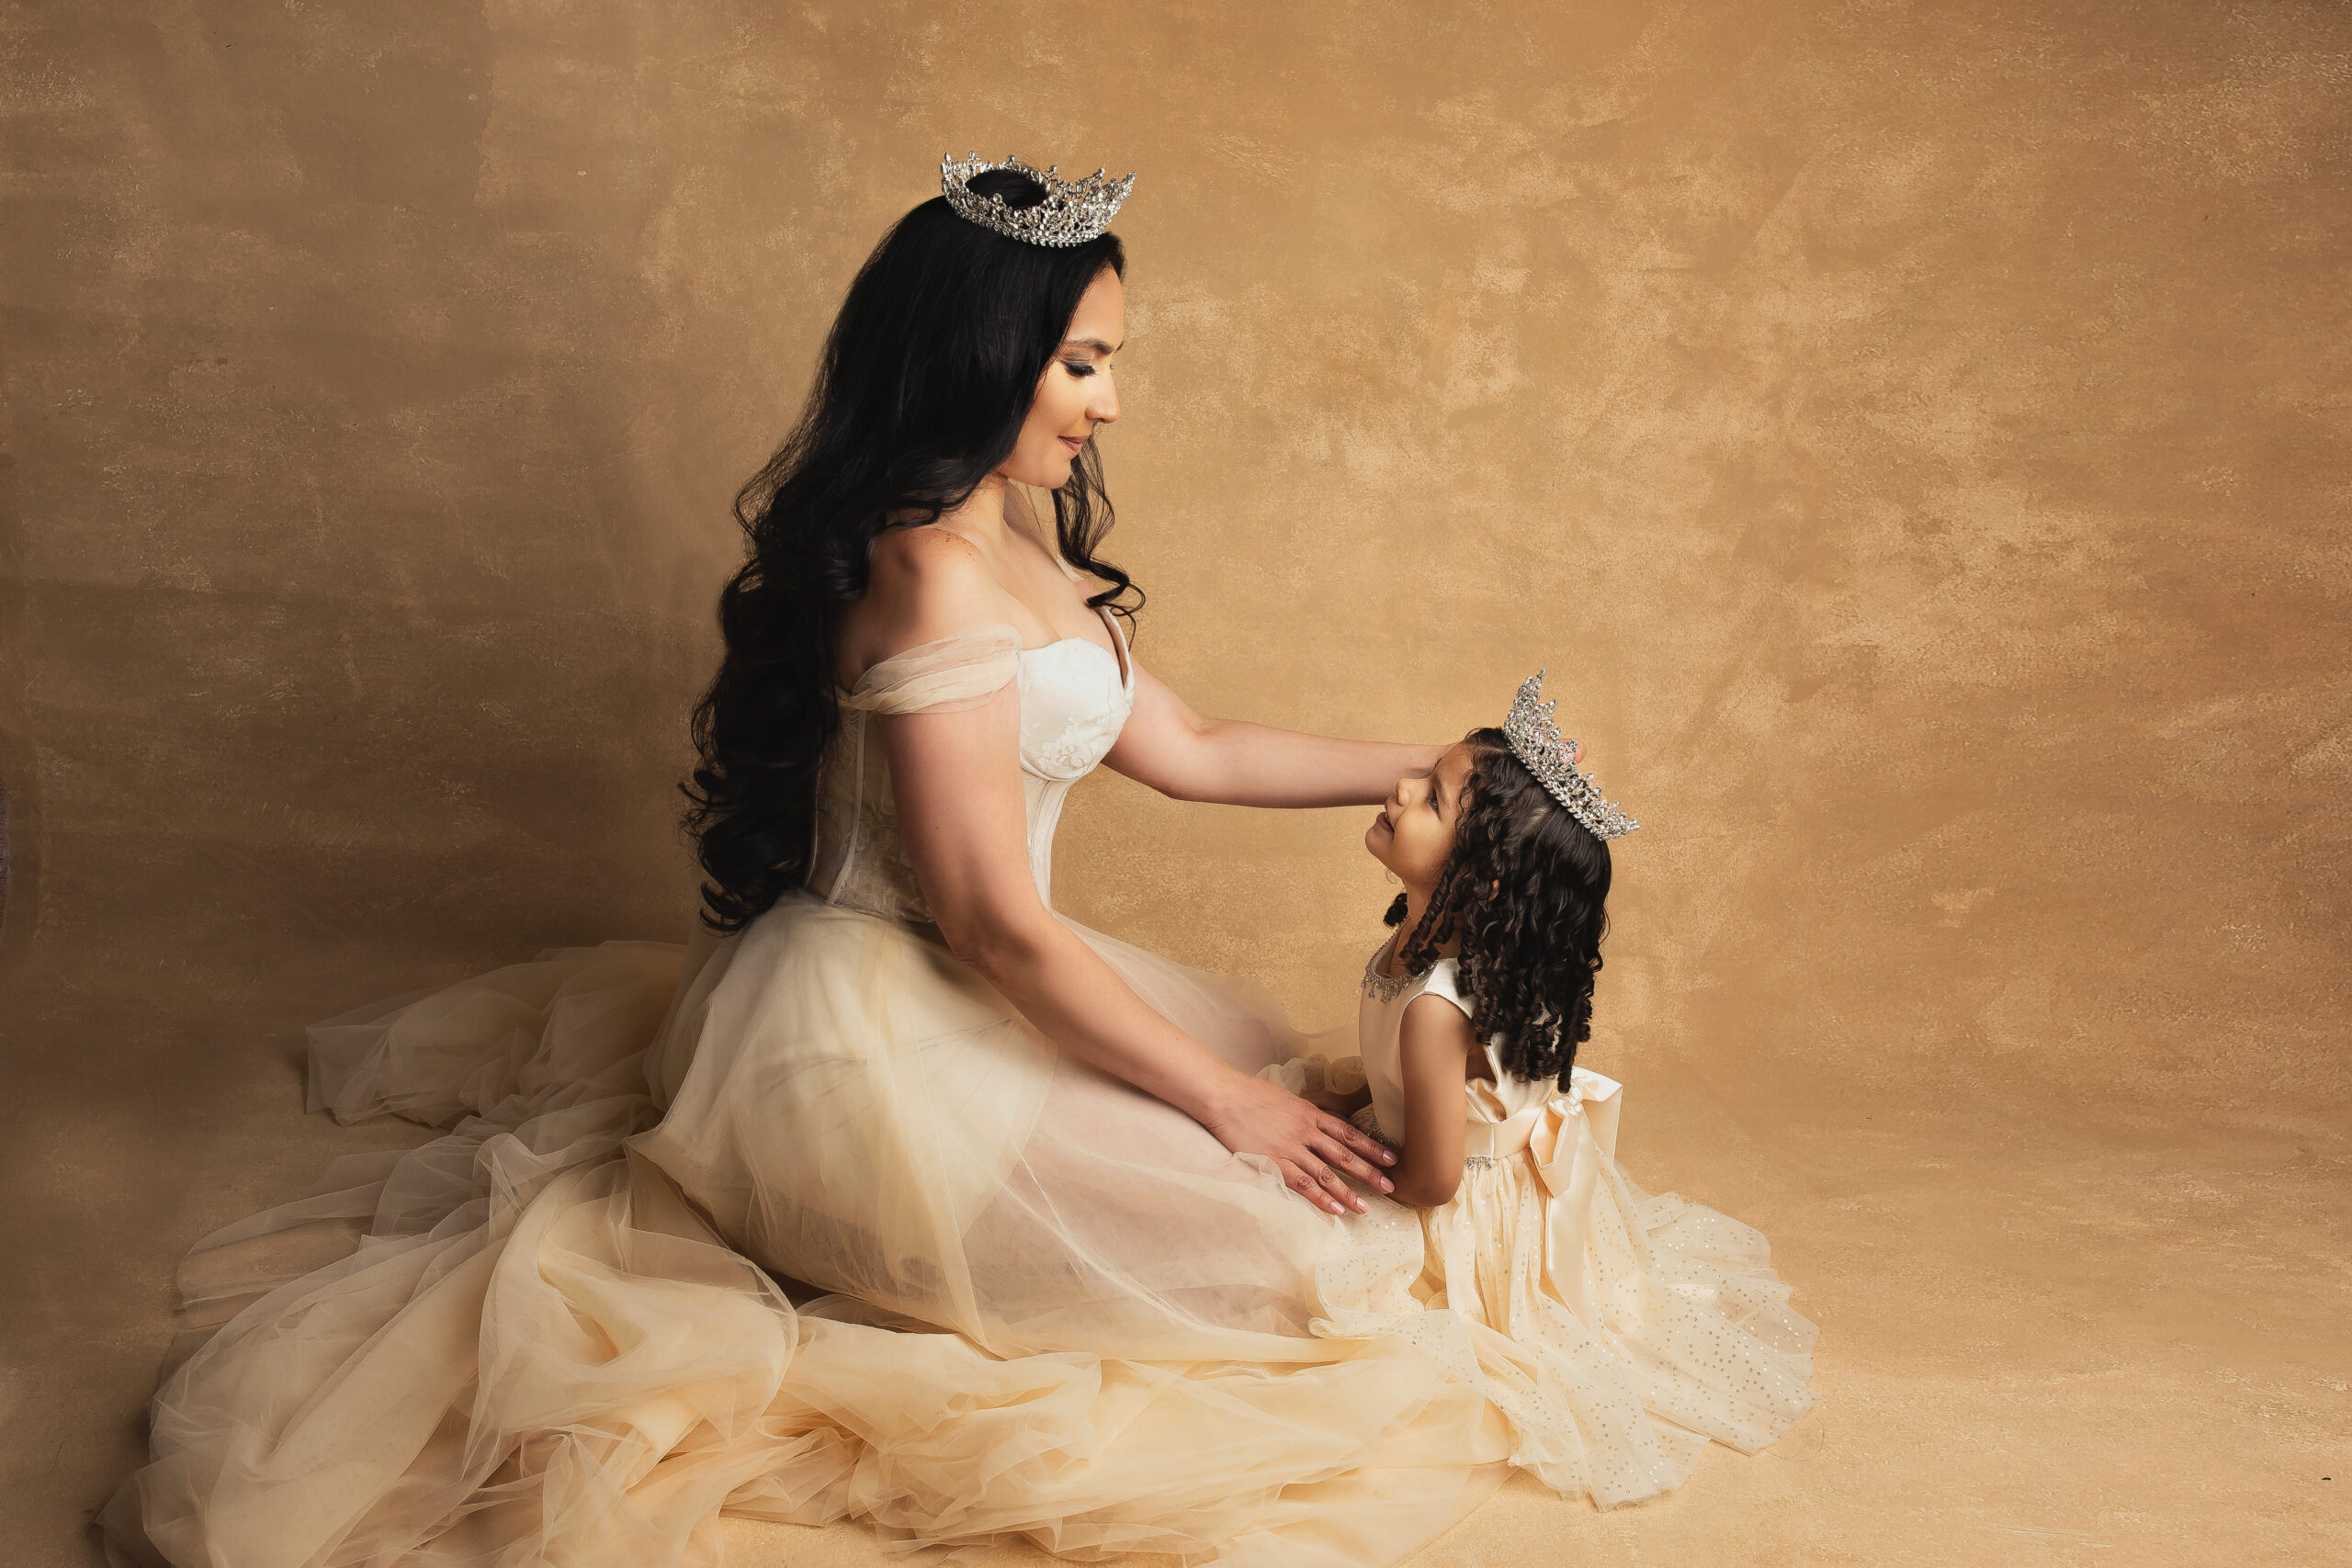 Fine art portrait with neutral tones and princess dress and crown taken by child photographer in Texas, Giselle Salazar